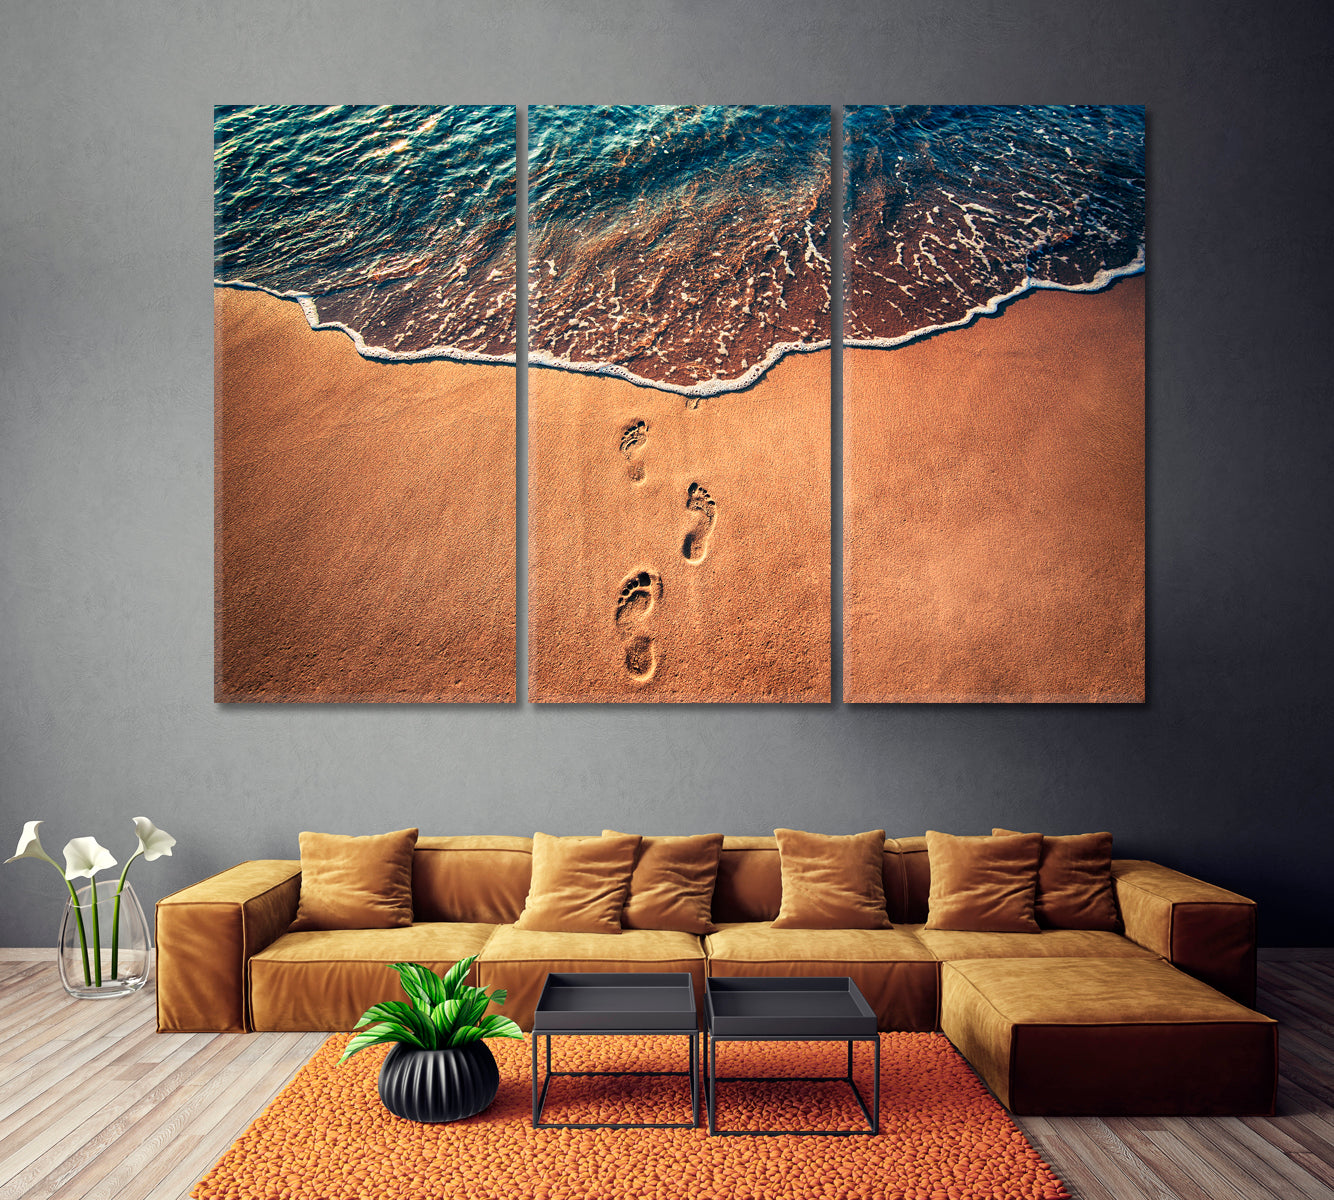 Footsteps on Sand Canvas Print ArtLexy 3 Panels 36"x24" inches 